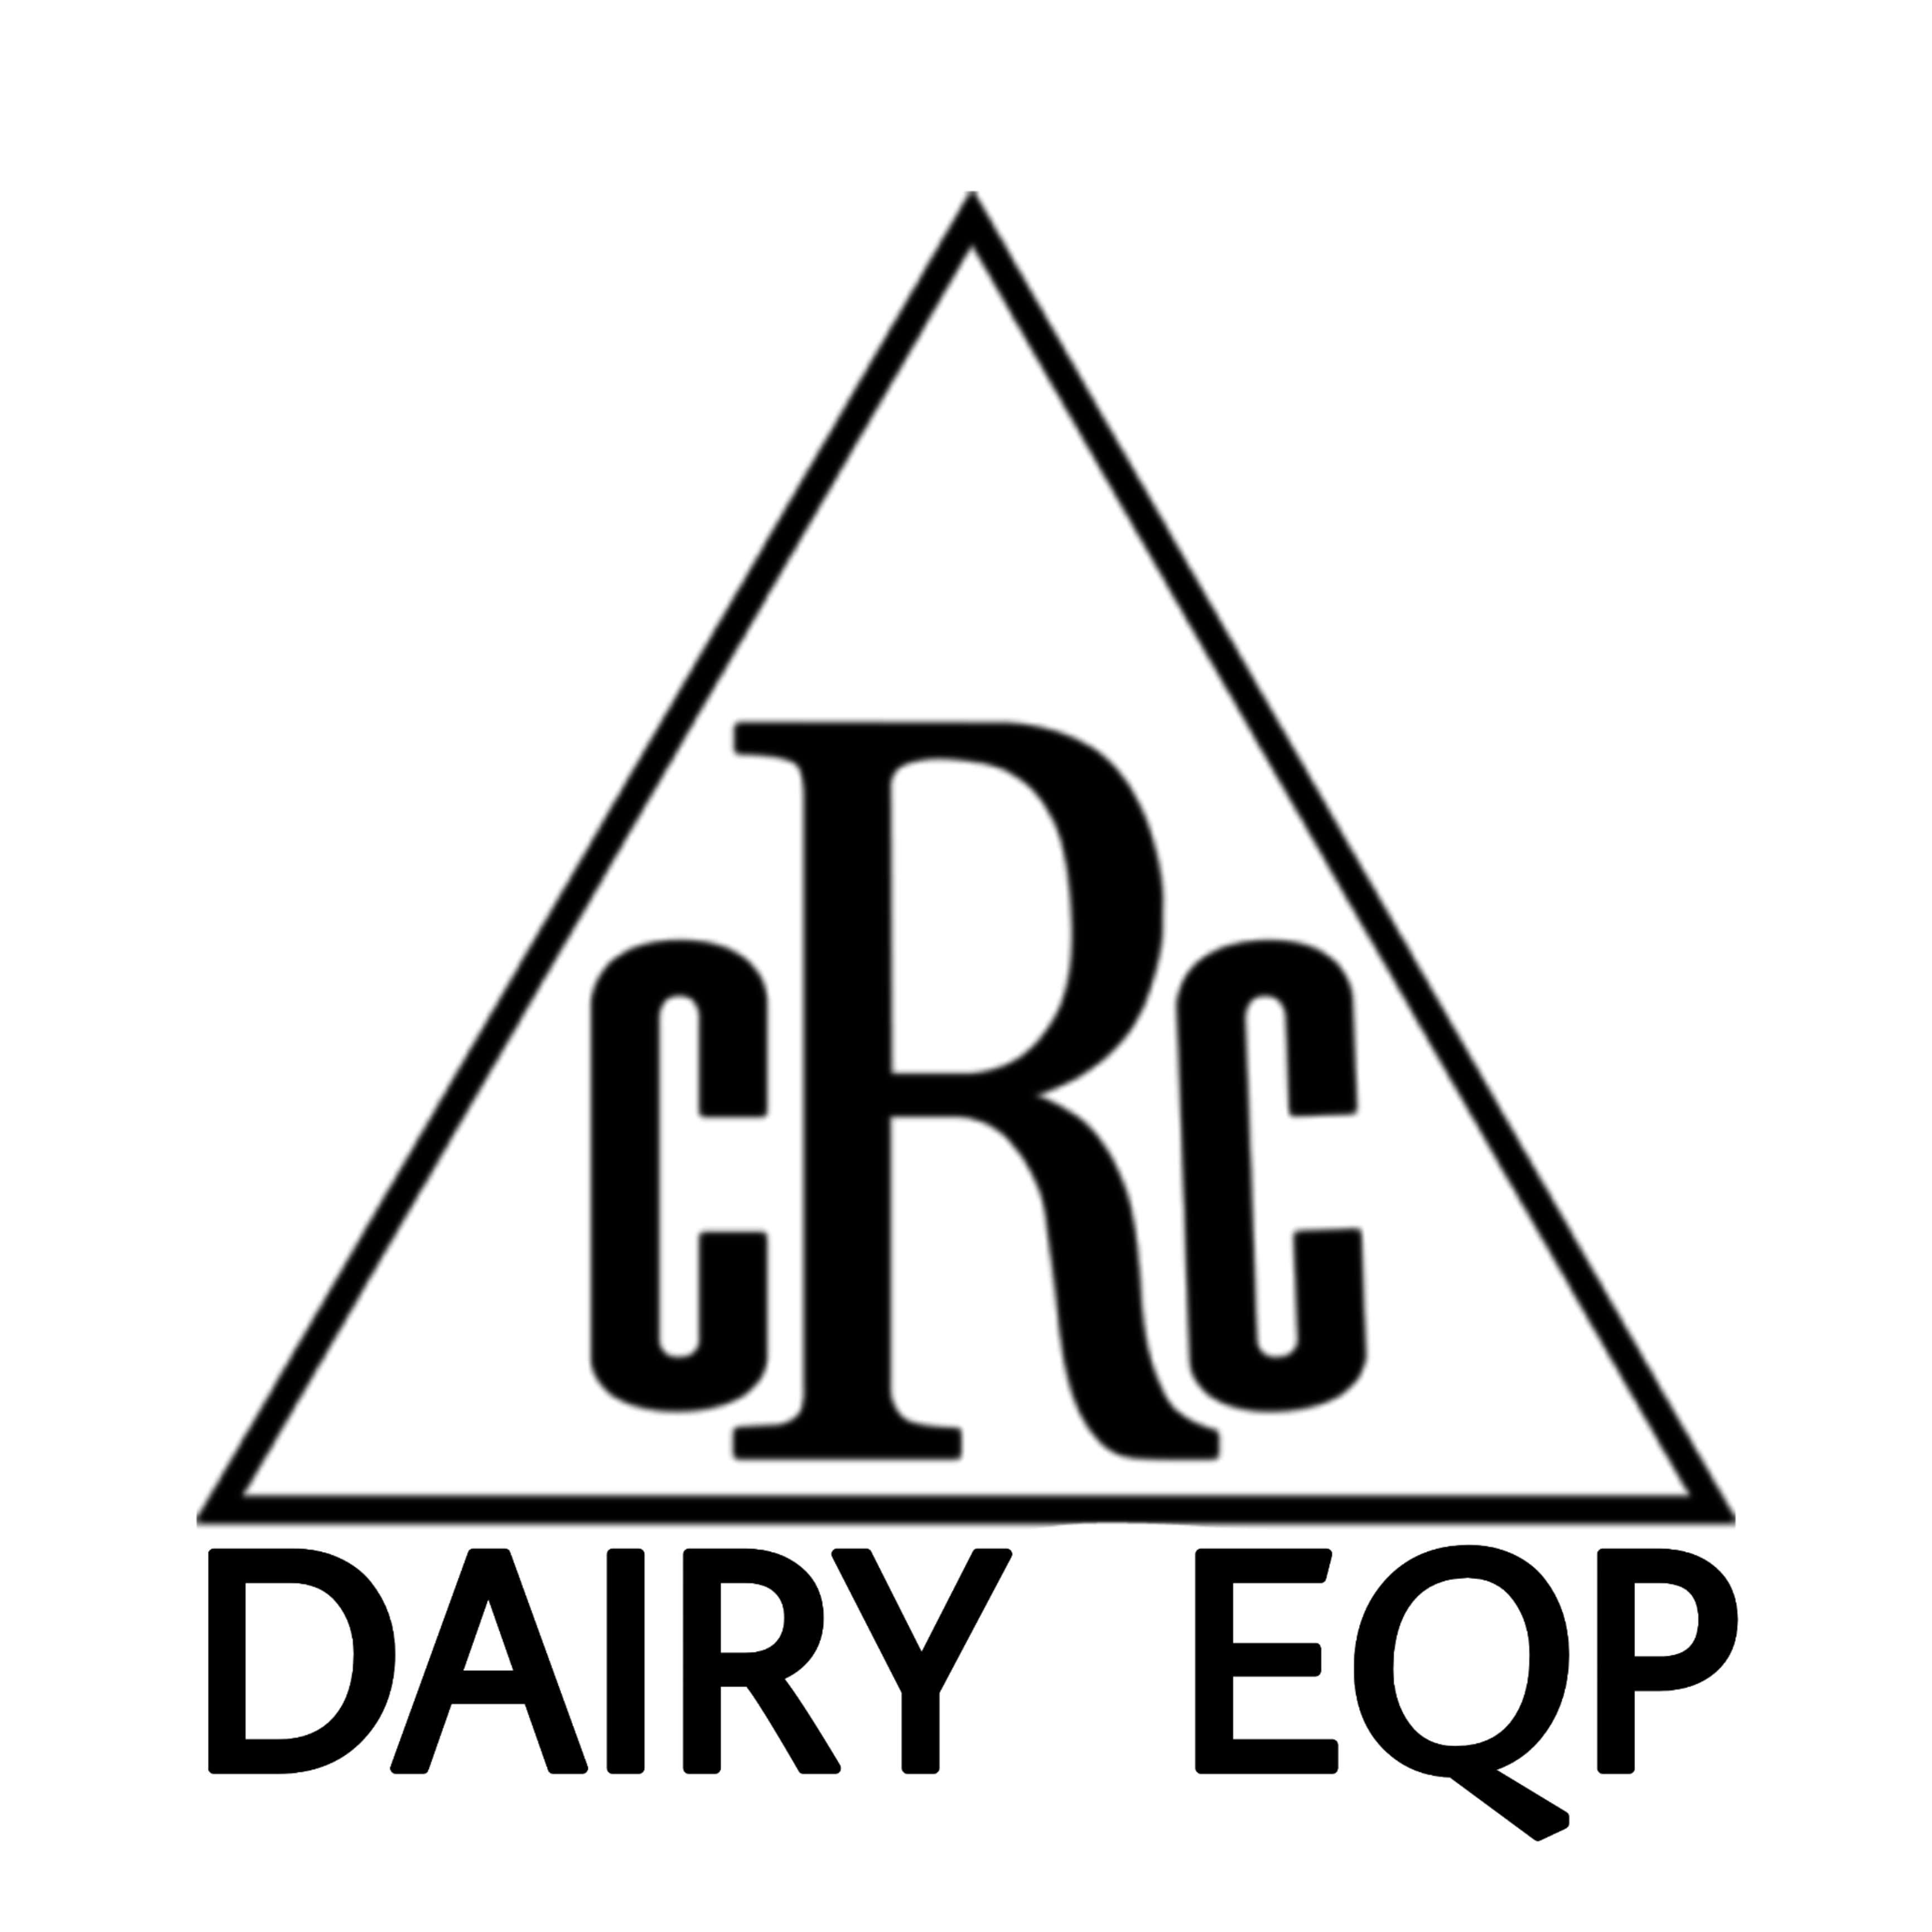 Chicago Rabbinical Council Dairy Equipment Kosher